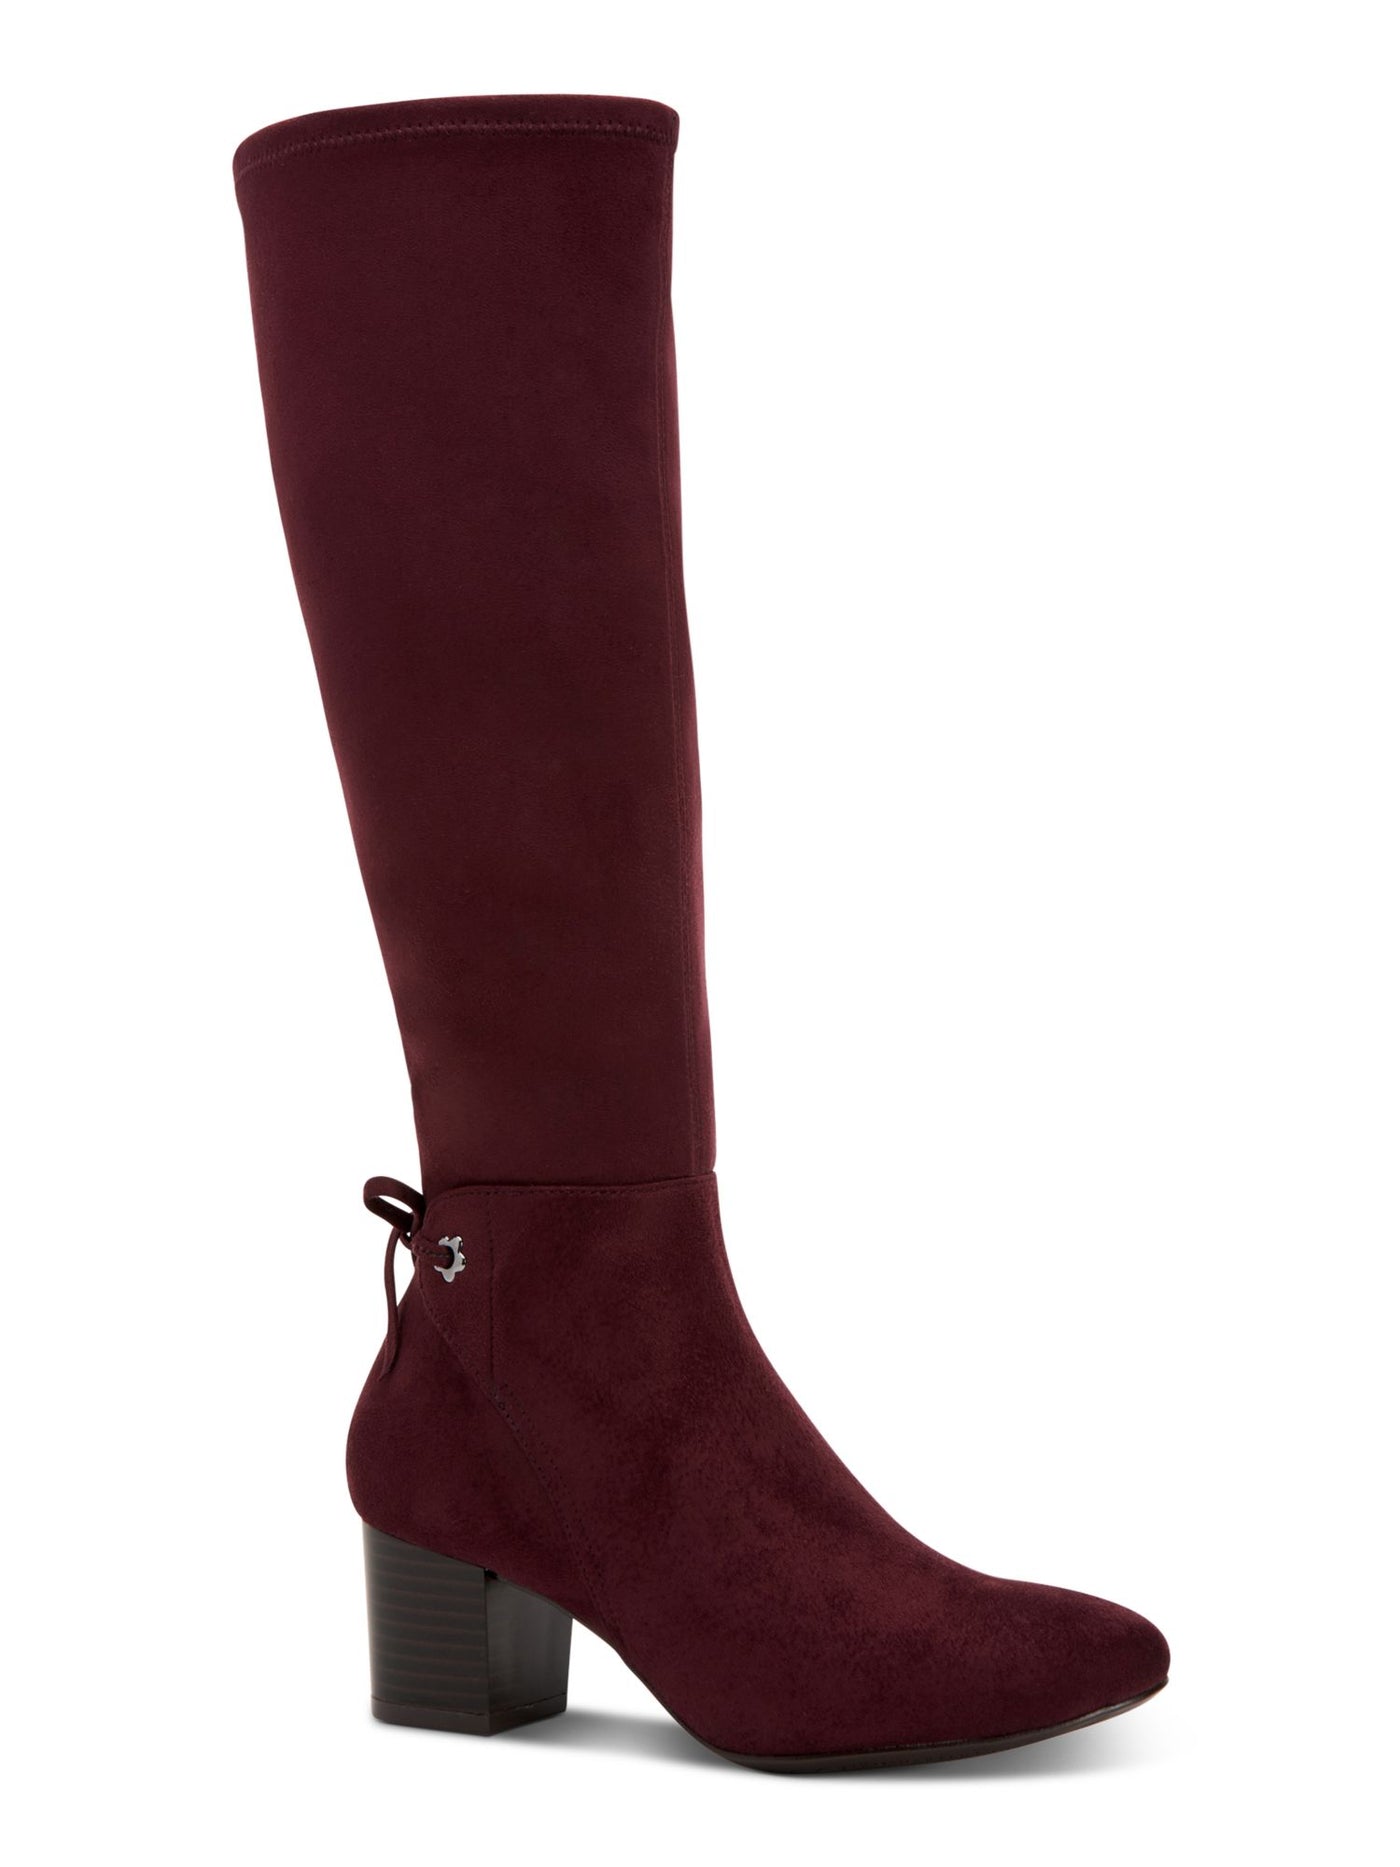 CHARTER CLUB Womens Burgundy Flower Grommets Bow Accent Cushioned Jaccque Almond Toe Block Heel Zip-Up Heeled Boots 8.5 M